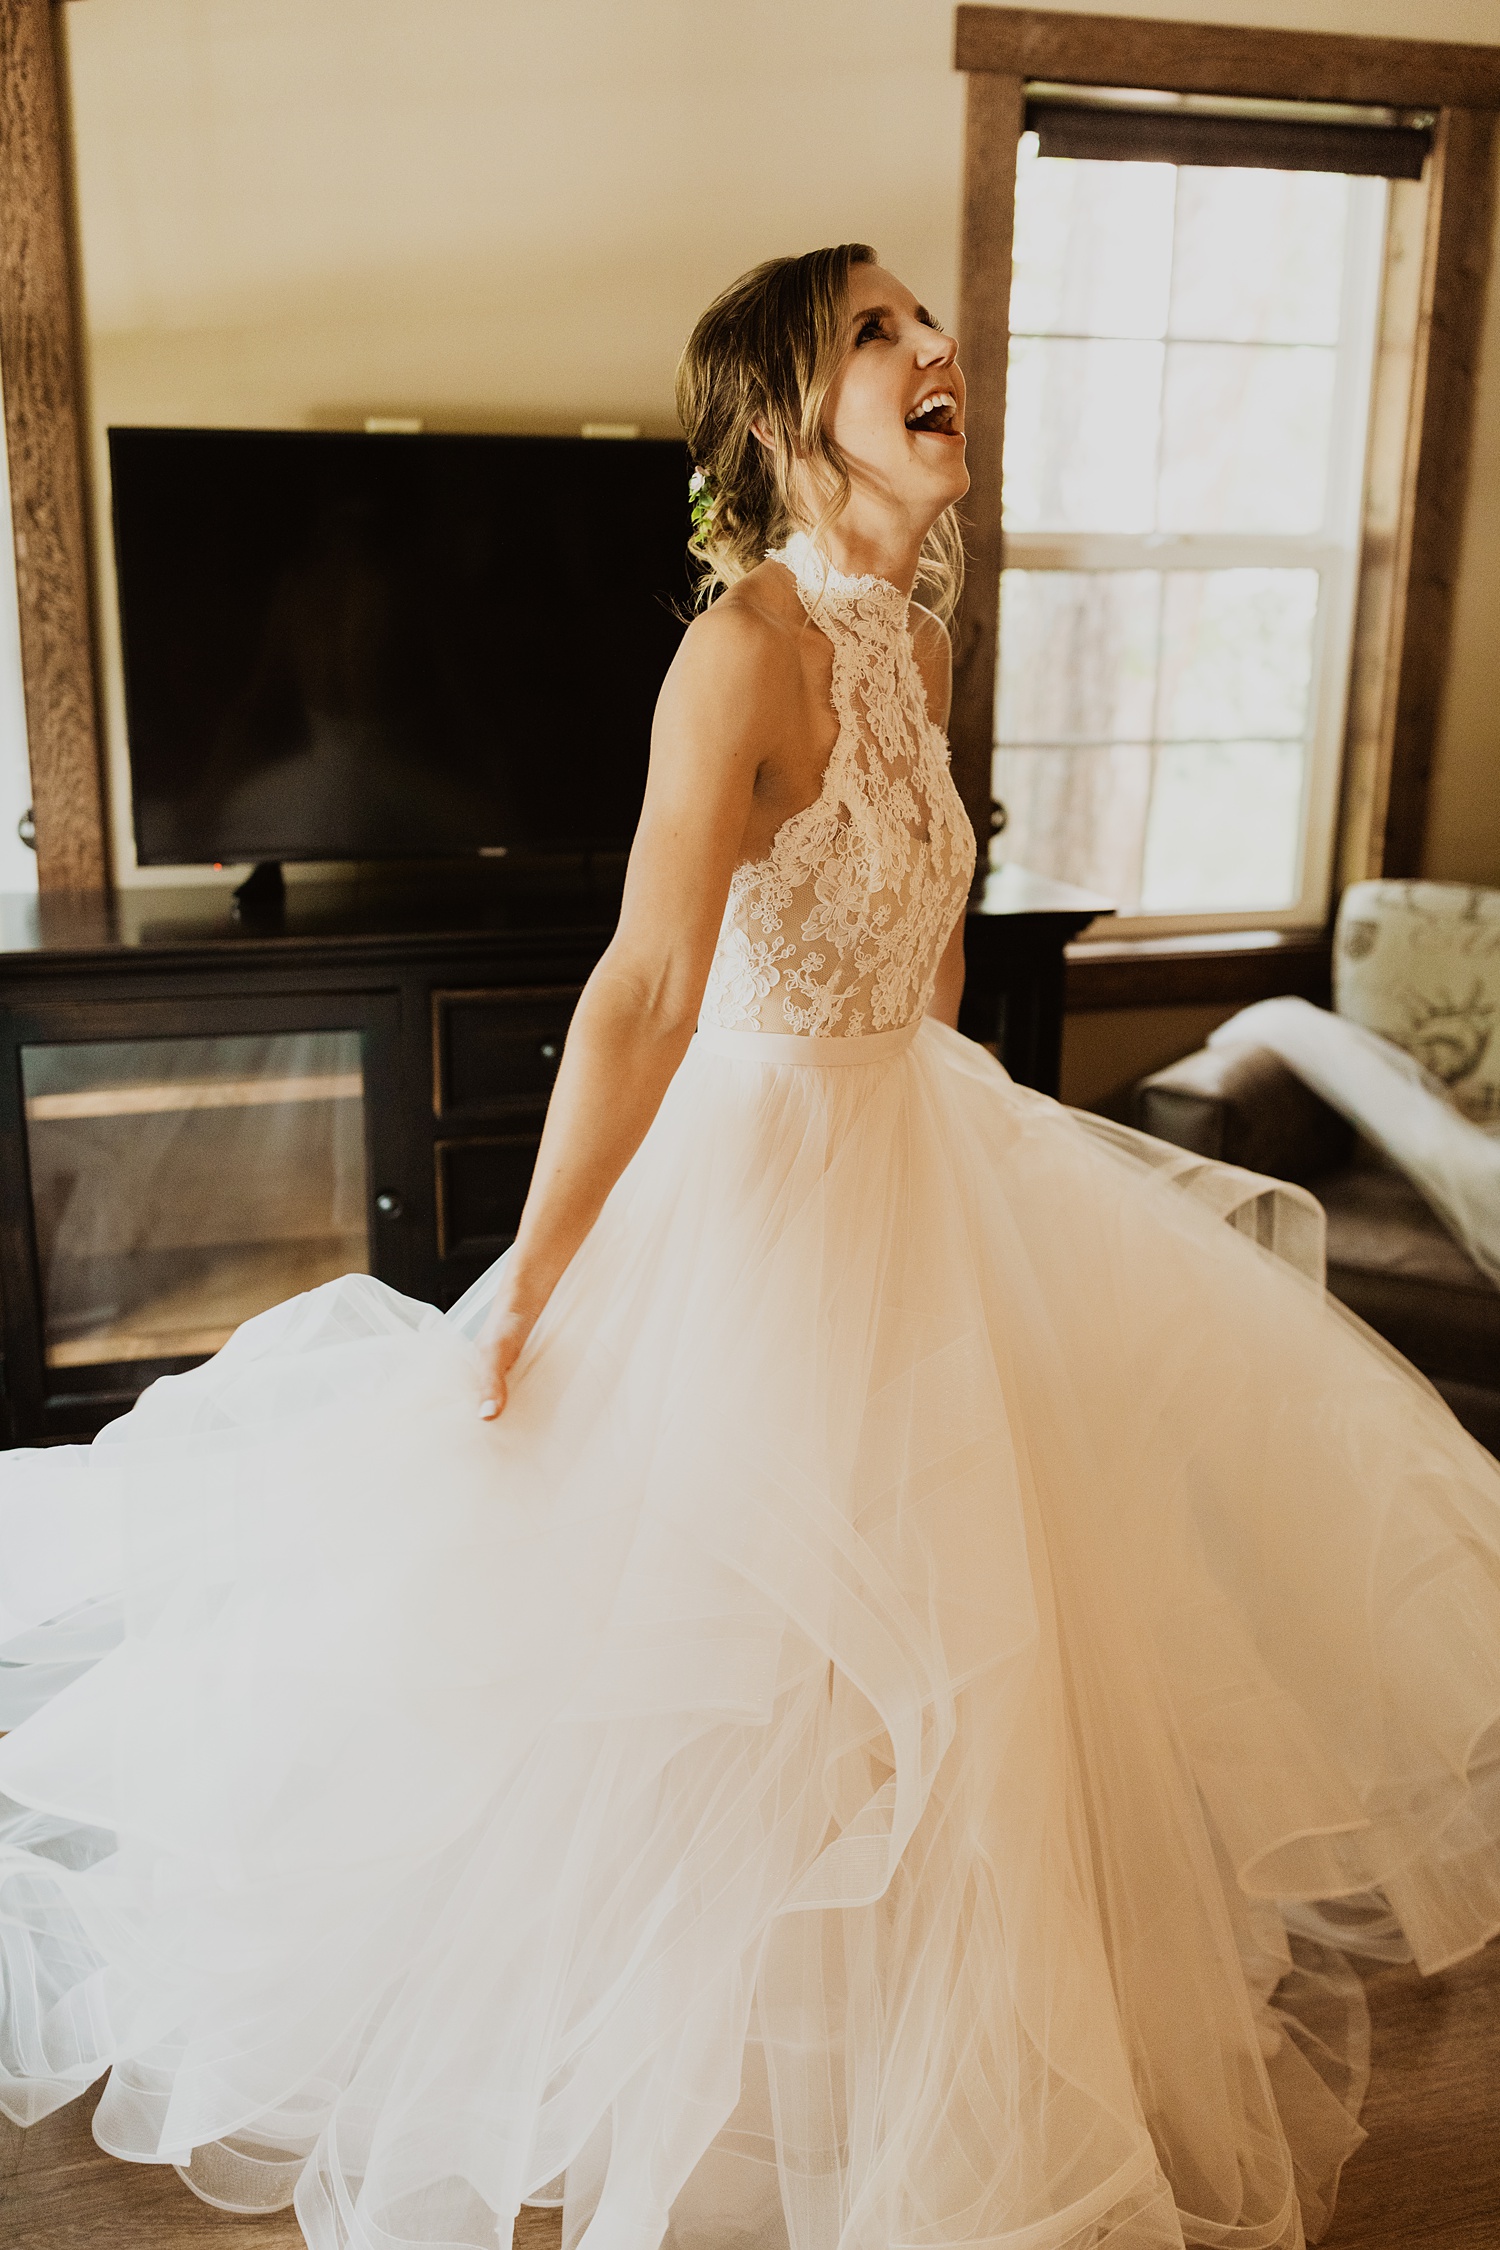 Bride Getting Ready | Putting On the Dress | Tulle Halter Top Ballgown | Cassie Madden Photography